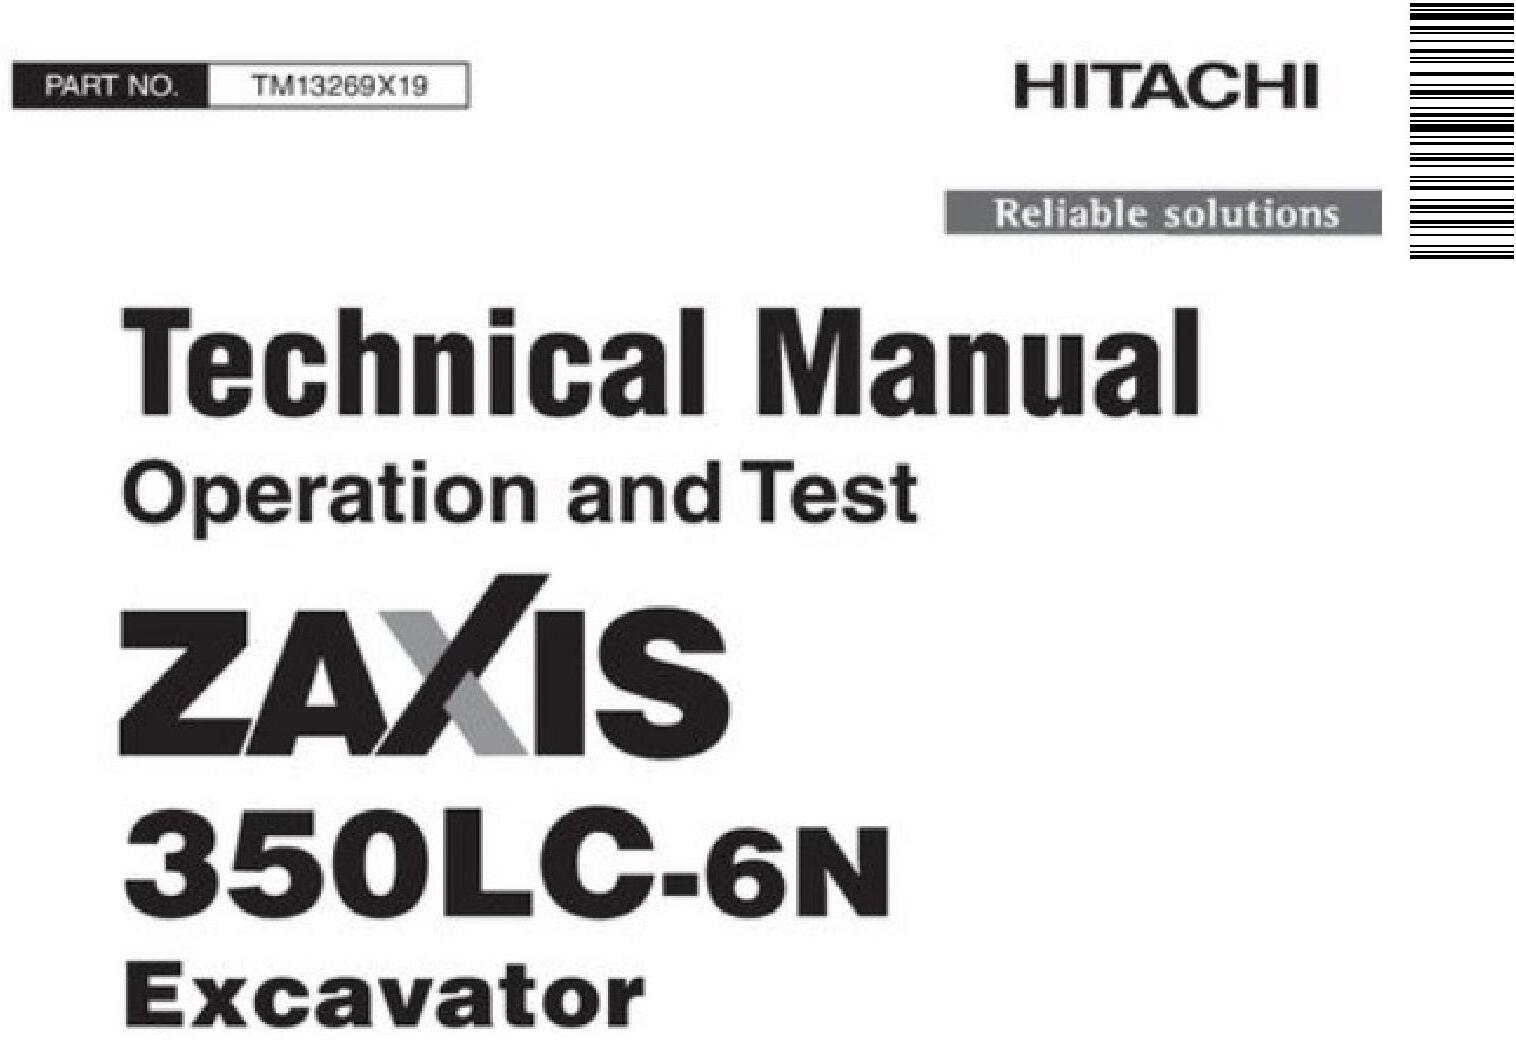 Hitachi Zaxis 350LC-6N Excavator Operation and Test Technical Service Manual (TM13269X19)